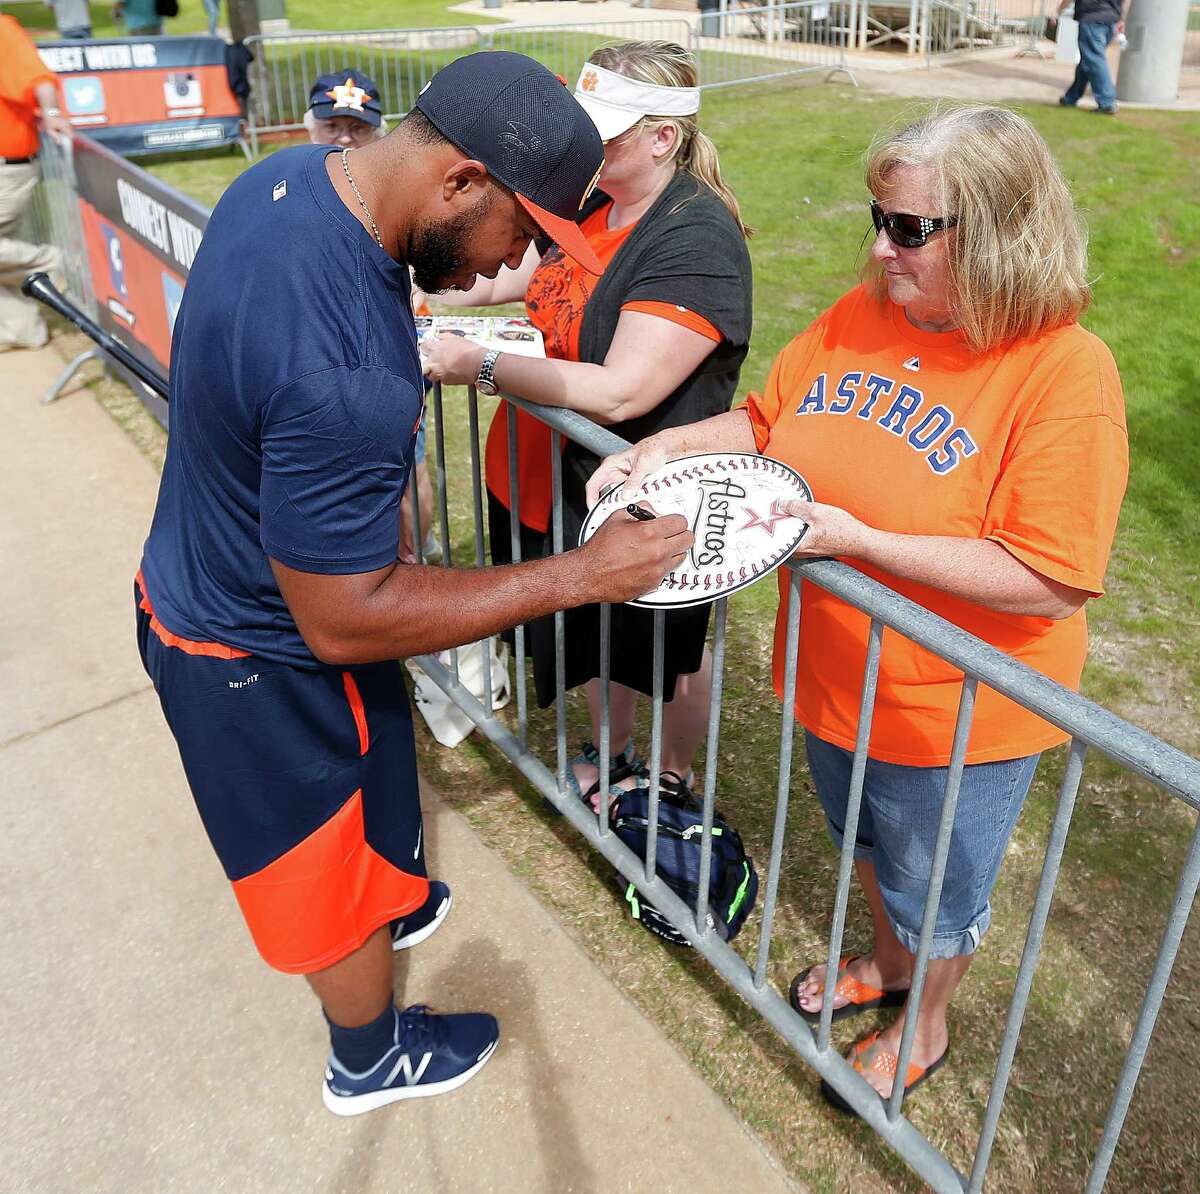 Houston Astros infielder Luis Valbuena signs an autograph for fan Carole Townsend as he walked back to the clubhouse after the batting cages during spring training in Kissimmee, Florida, Saturday, Feb. 20, 2016.